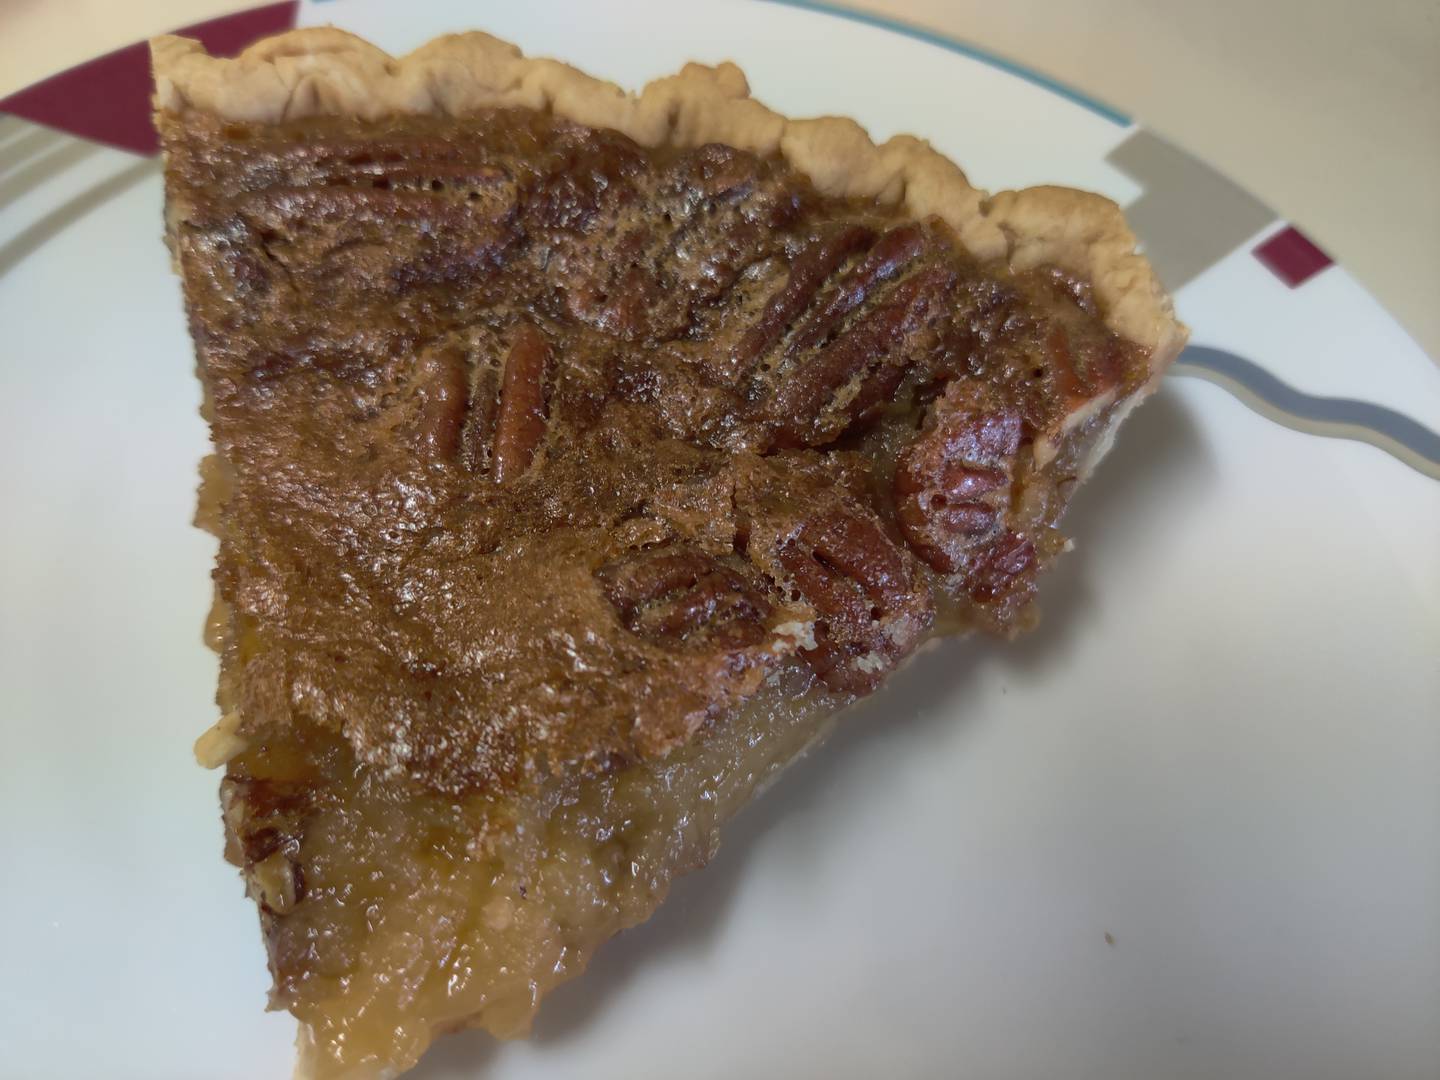 A slice of pecan pie to take away from the Atrium Café in downtown Geneva.